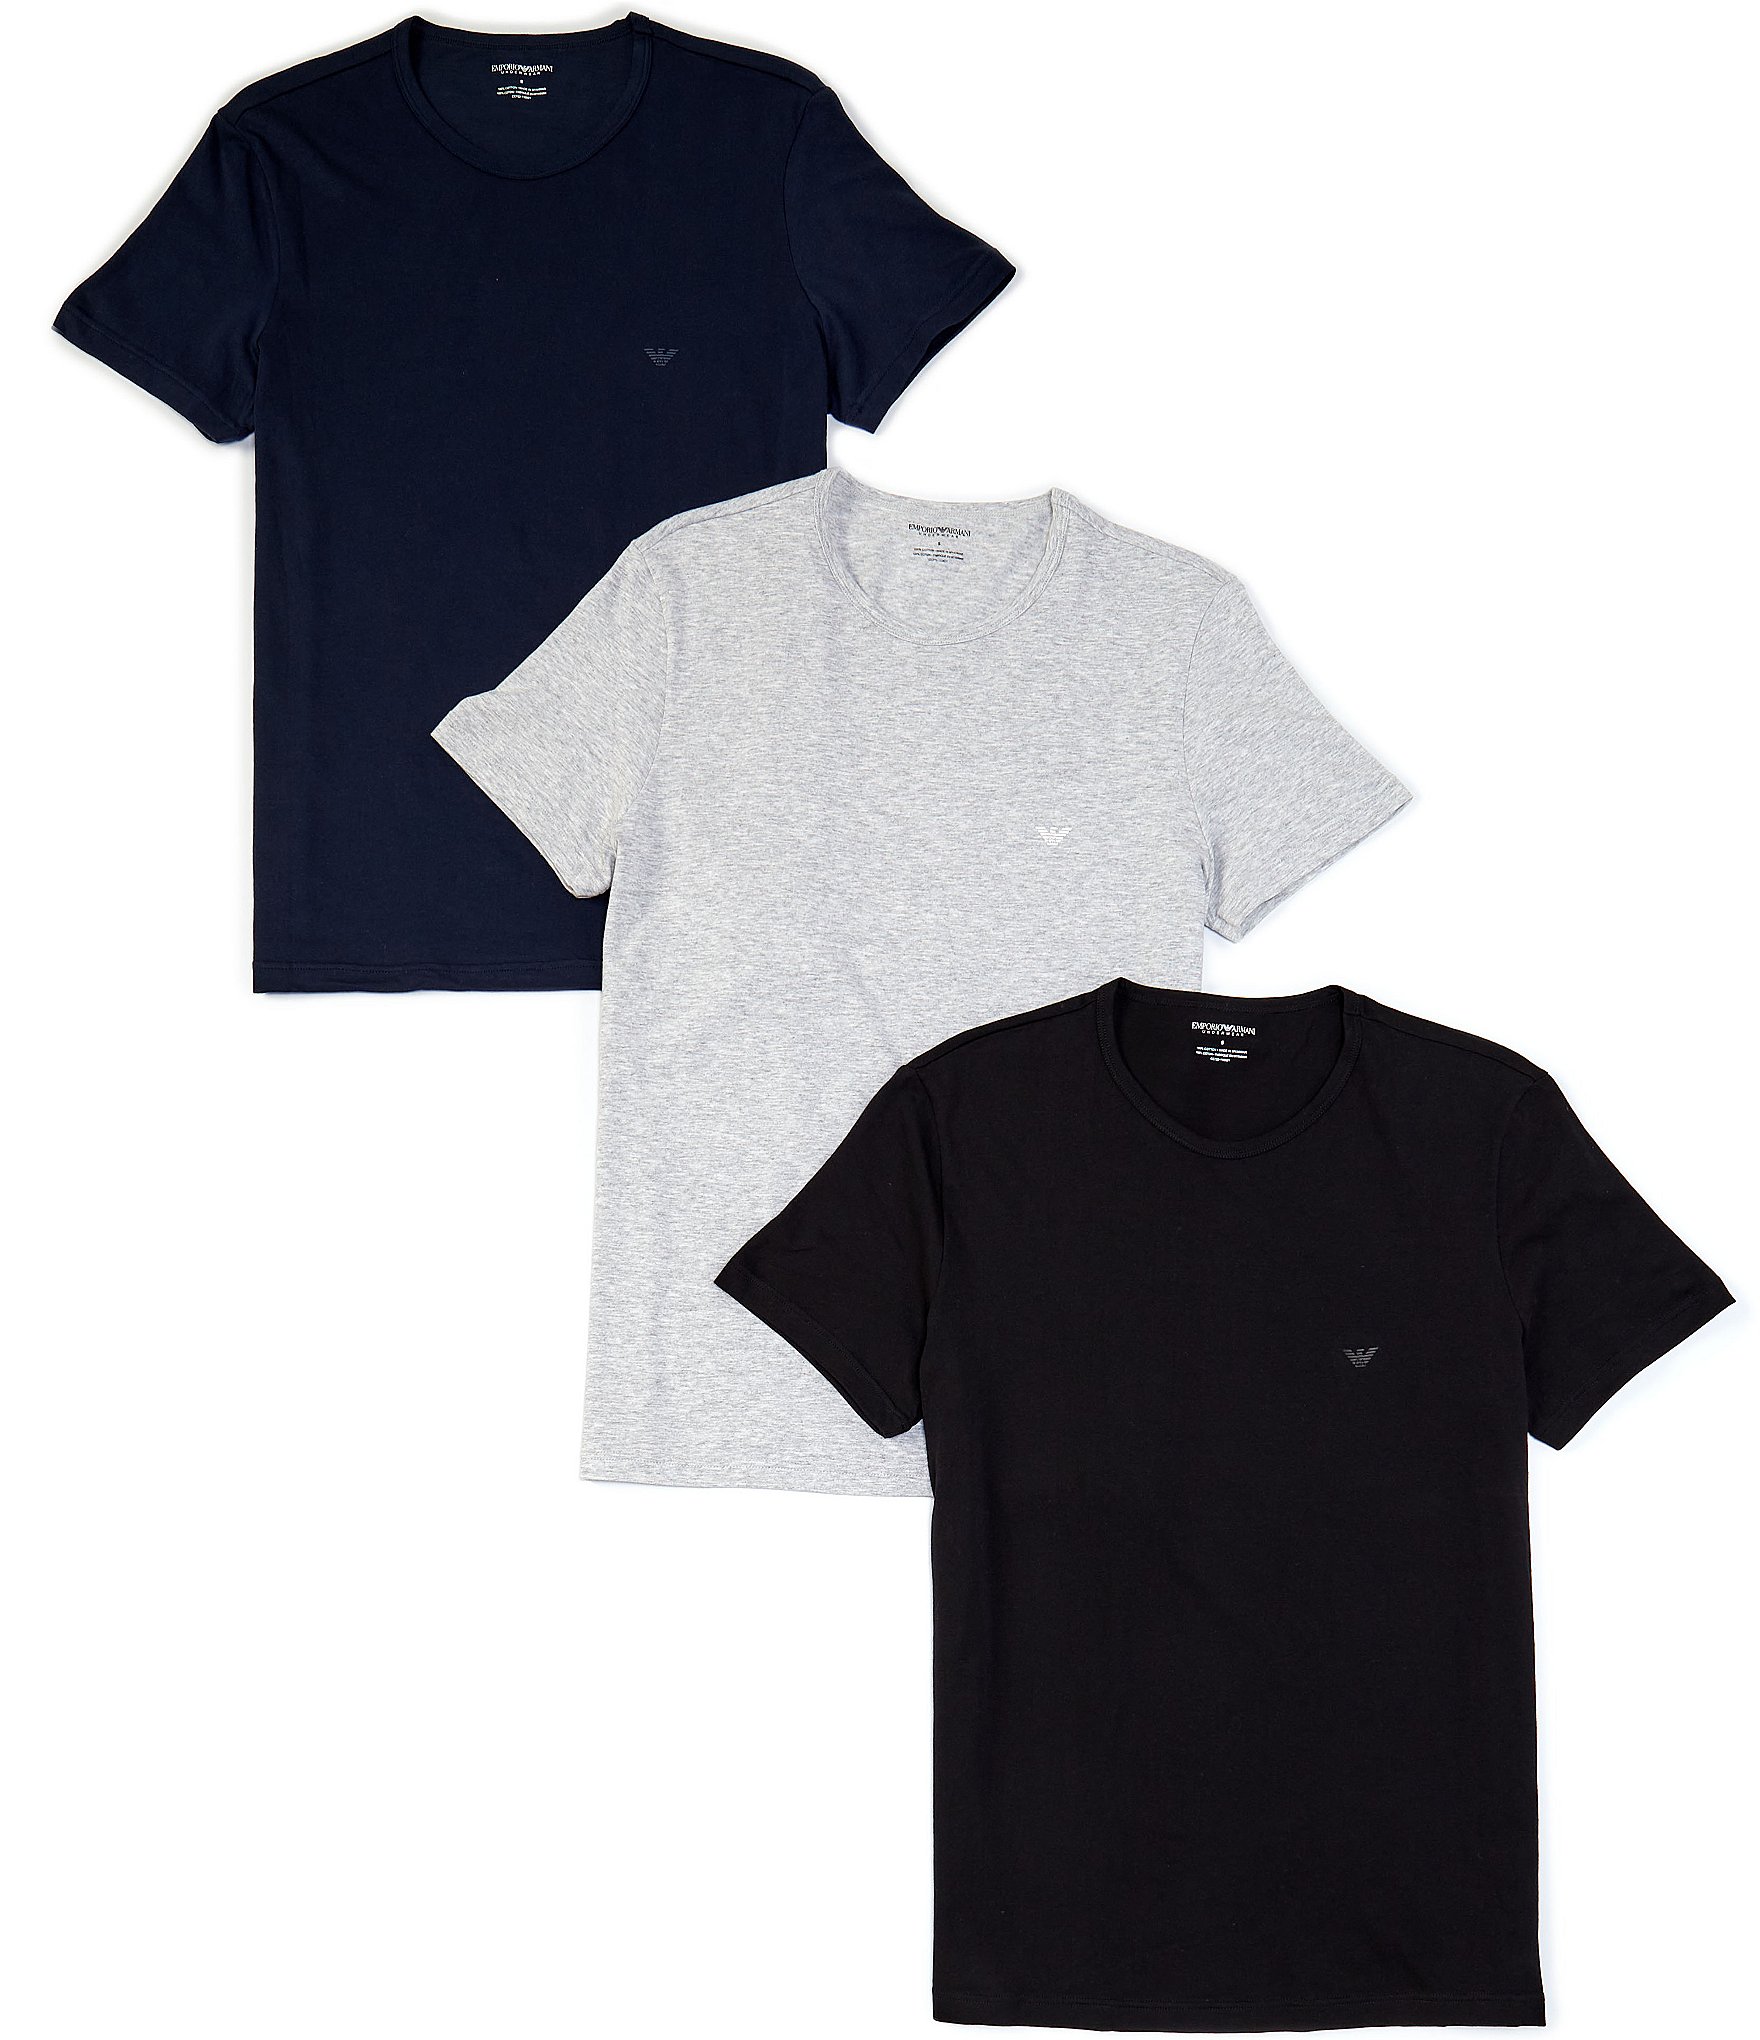 Gold Label Roundtree & Yorke Supima Cotton Crew Neck T-Shirts 3-Pack